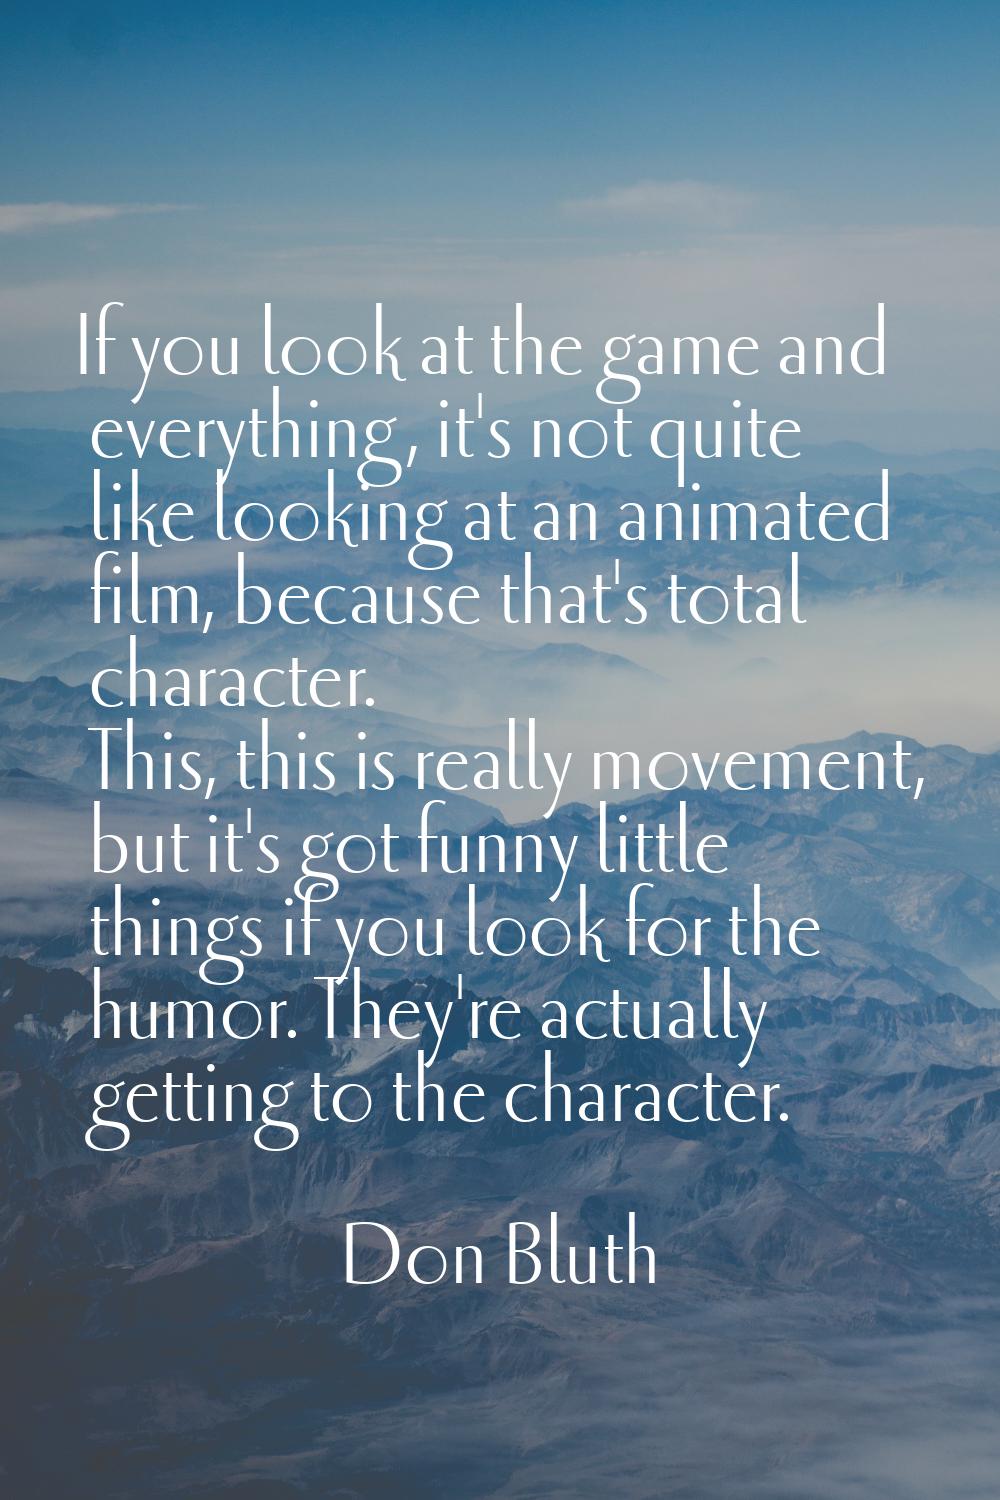 If you look at the game and everything, it's not quite like looking at an animated film, because th